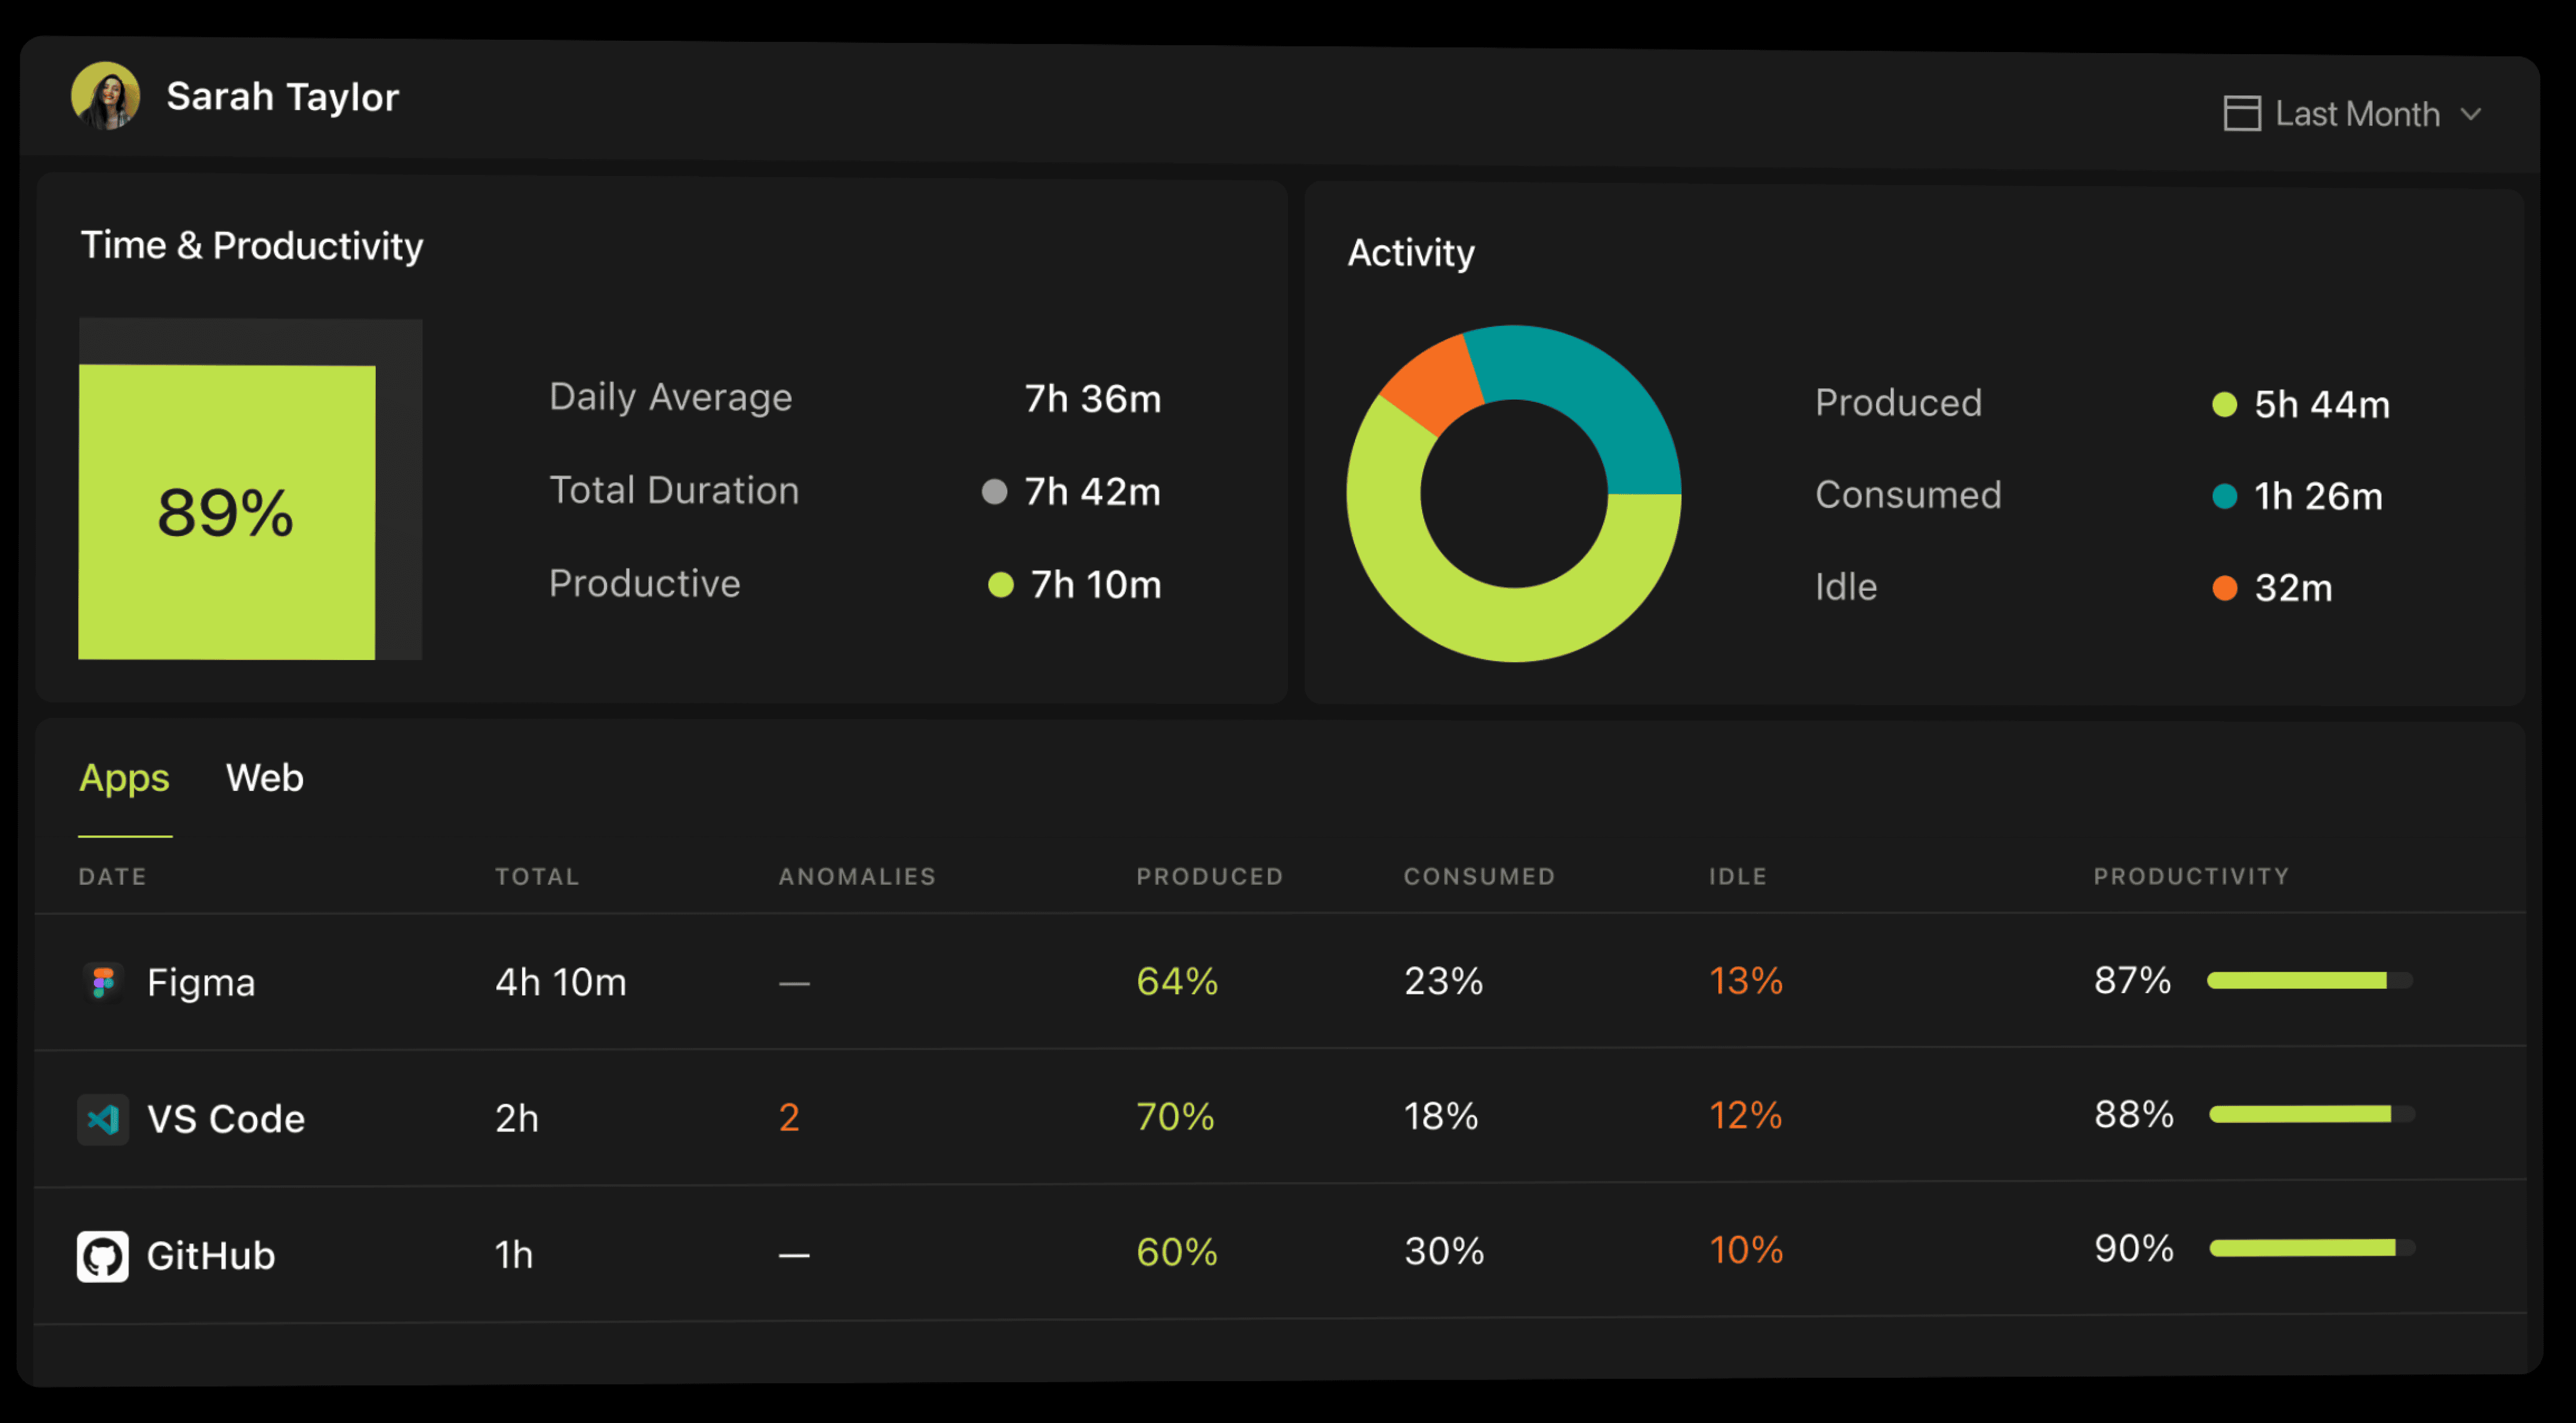 Personal productivity dashboard for Sarah Taylor in Pulse, highlighting an 89% productivity card, a circular graph of her activity distribution, and a detailed list of her app usage with associated productivity metrics for design and development tools.